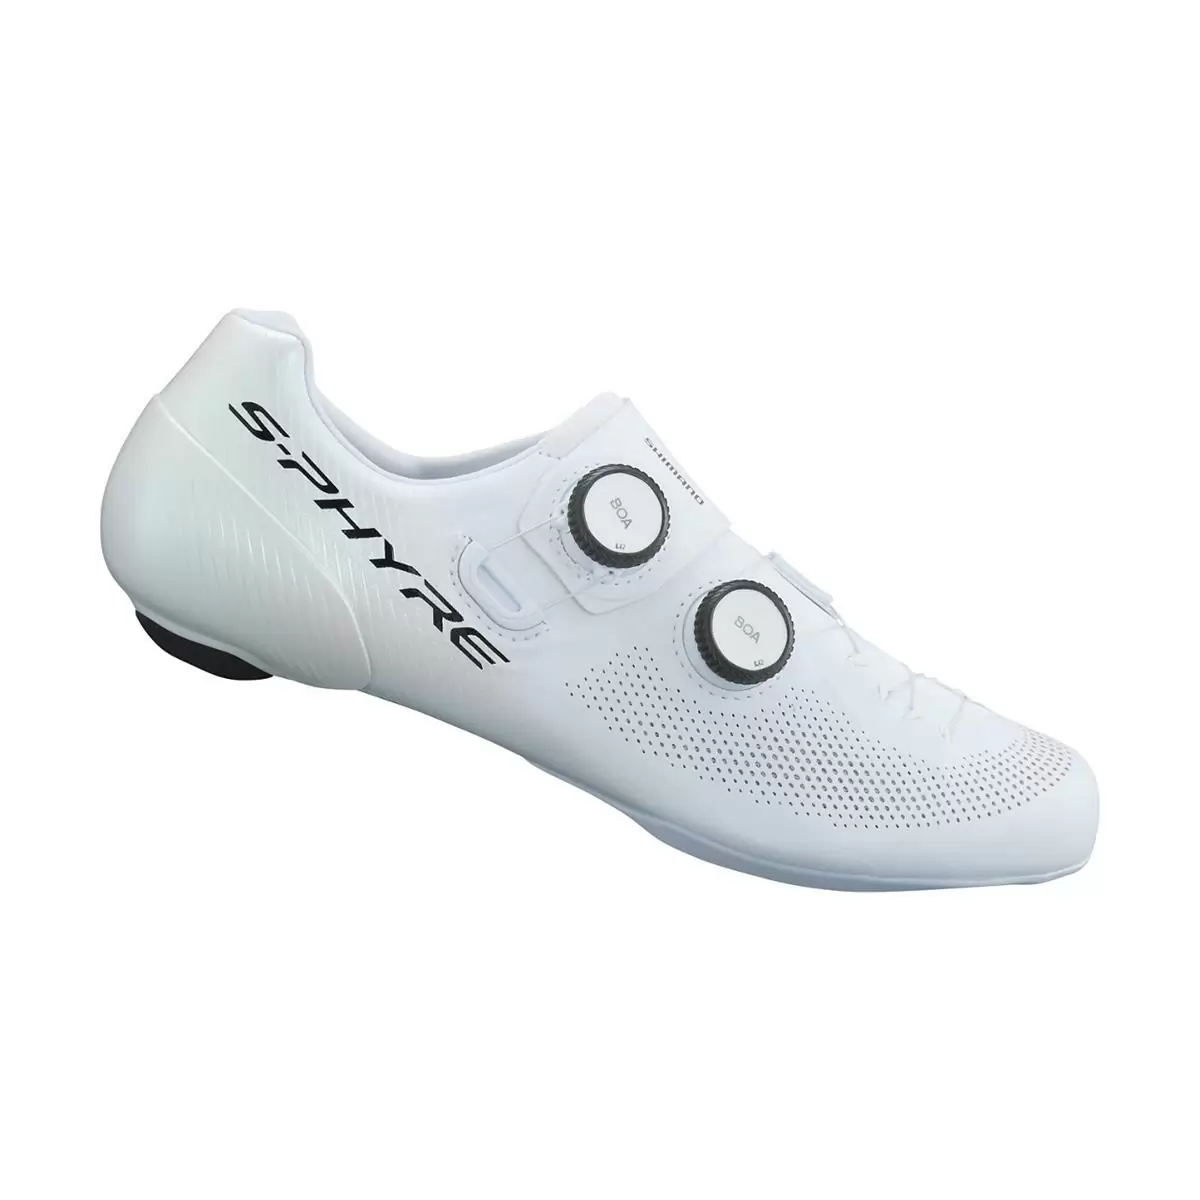 Road Shoes RC9 S-PHYRE SH-RC903 White Size 39 - image